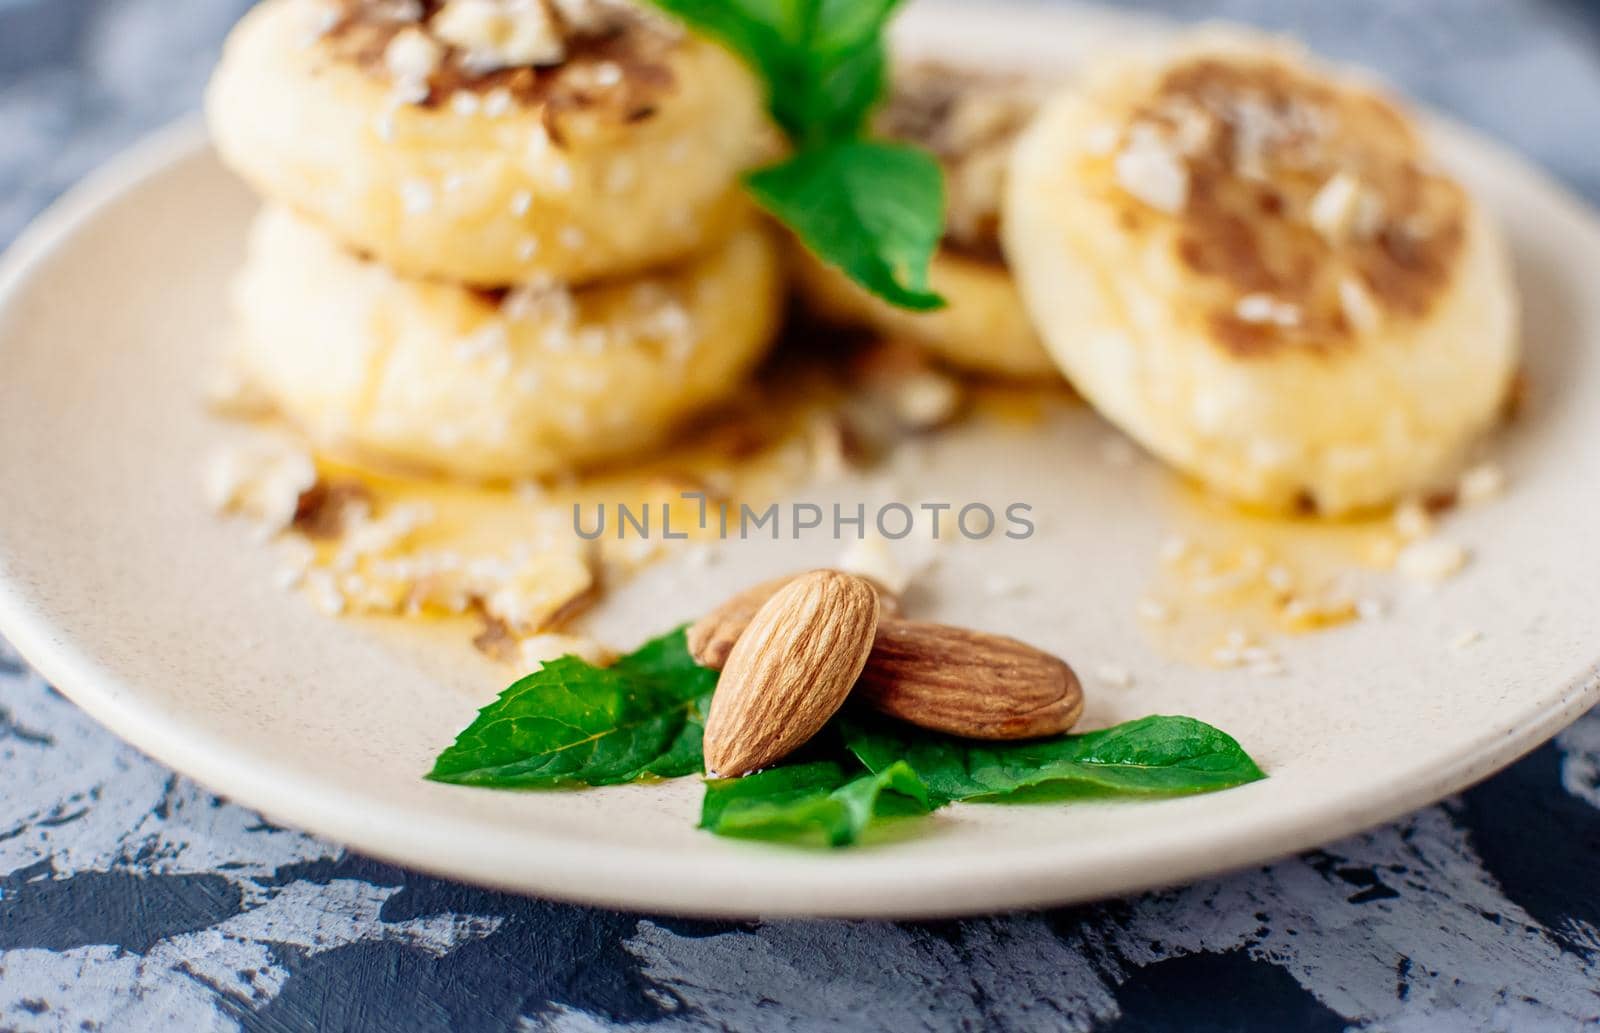 Cheesecakes, cottage cheese pancakes with almonds, fresh mint and maple syrup on a gray background from a concrete table. Cheesecakes, homemade traditional Ukrainian and Russian cheesecakes, top view.